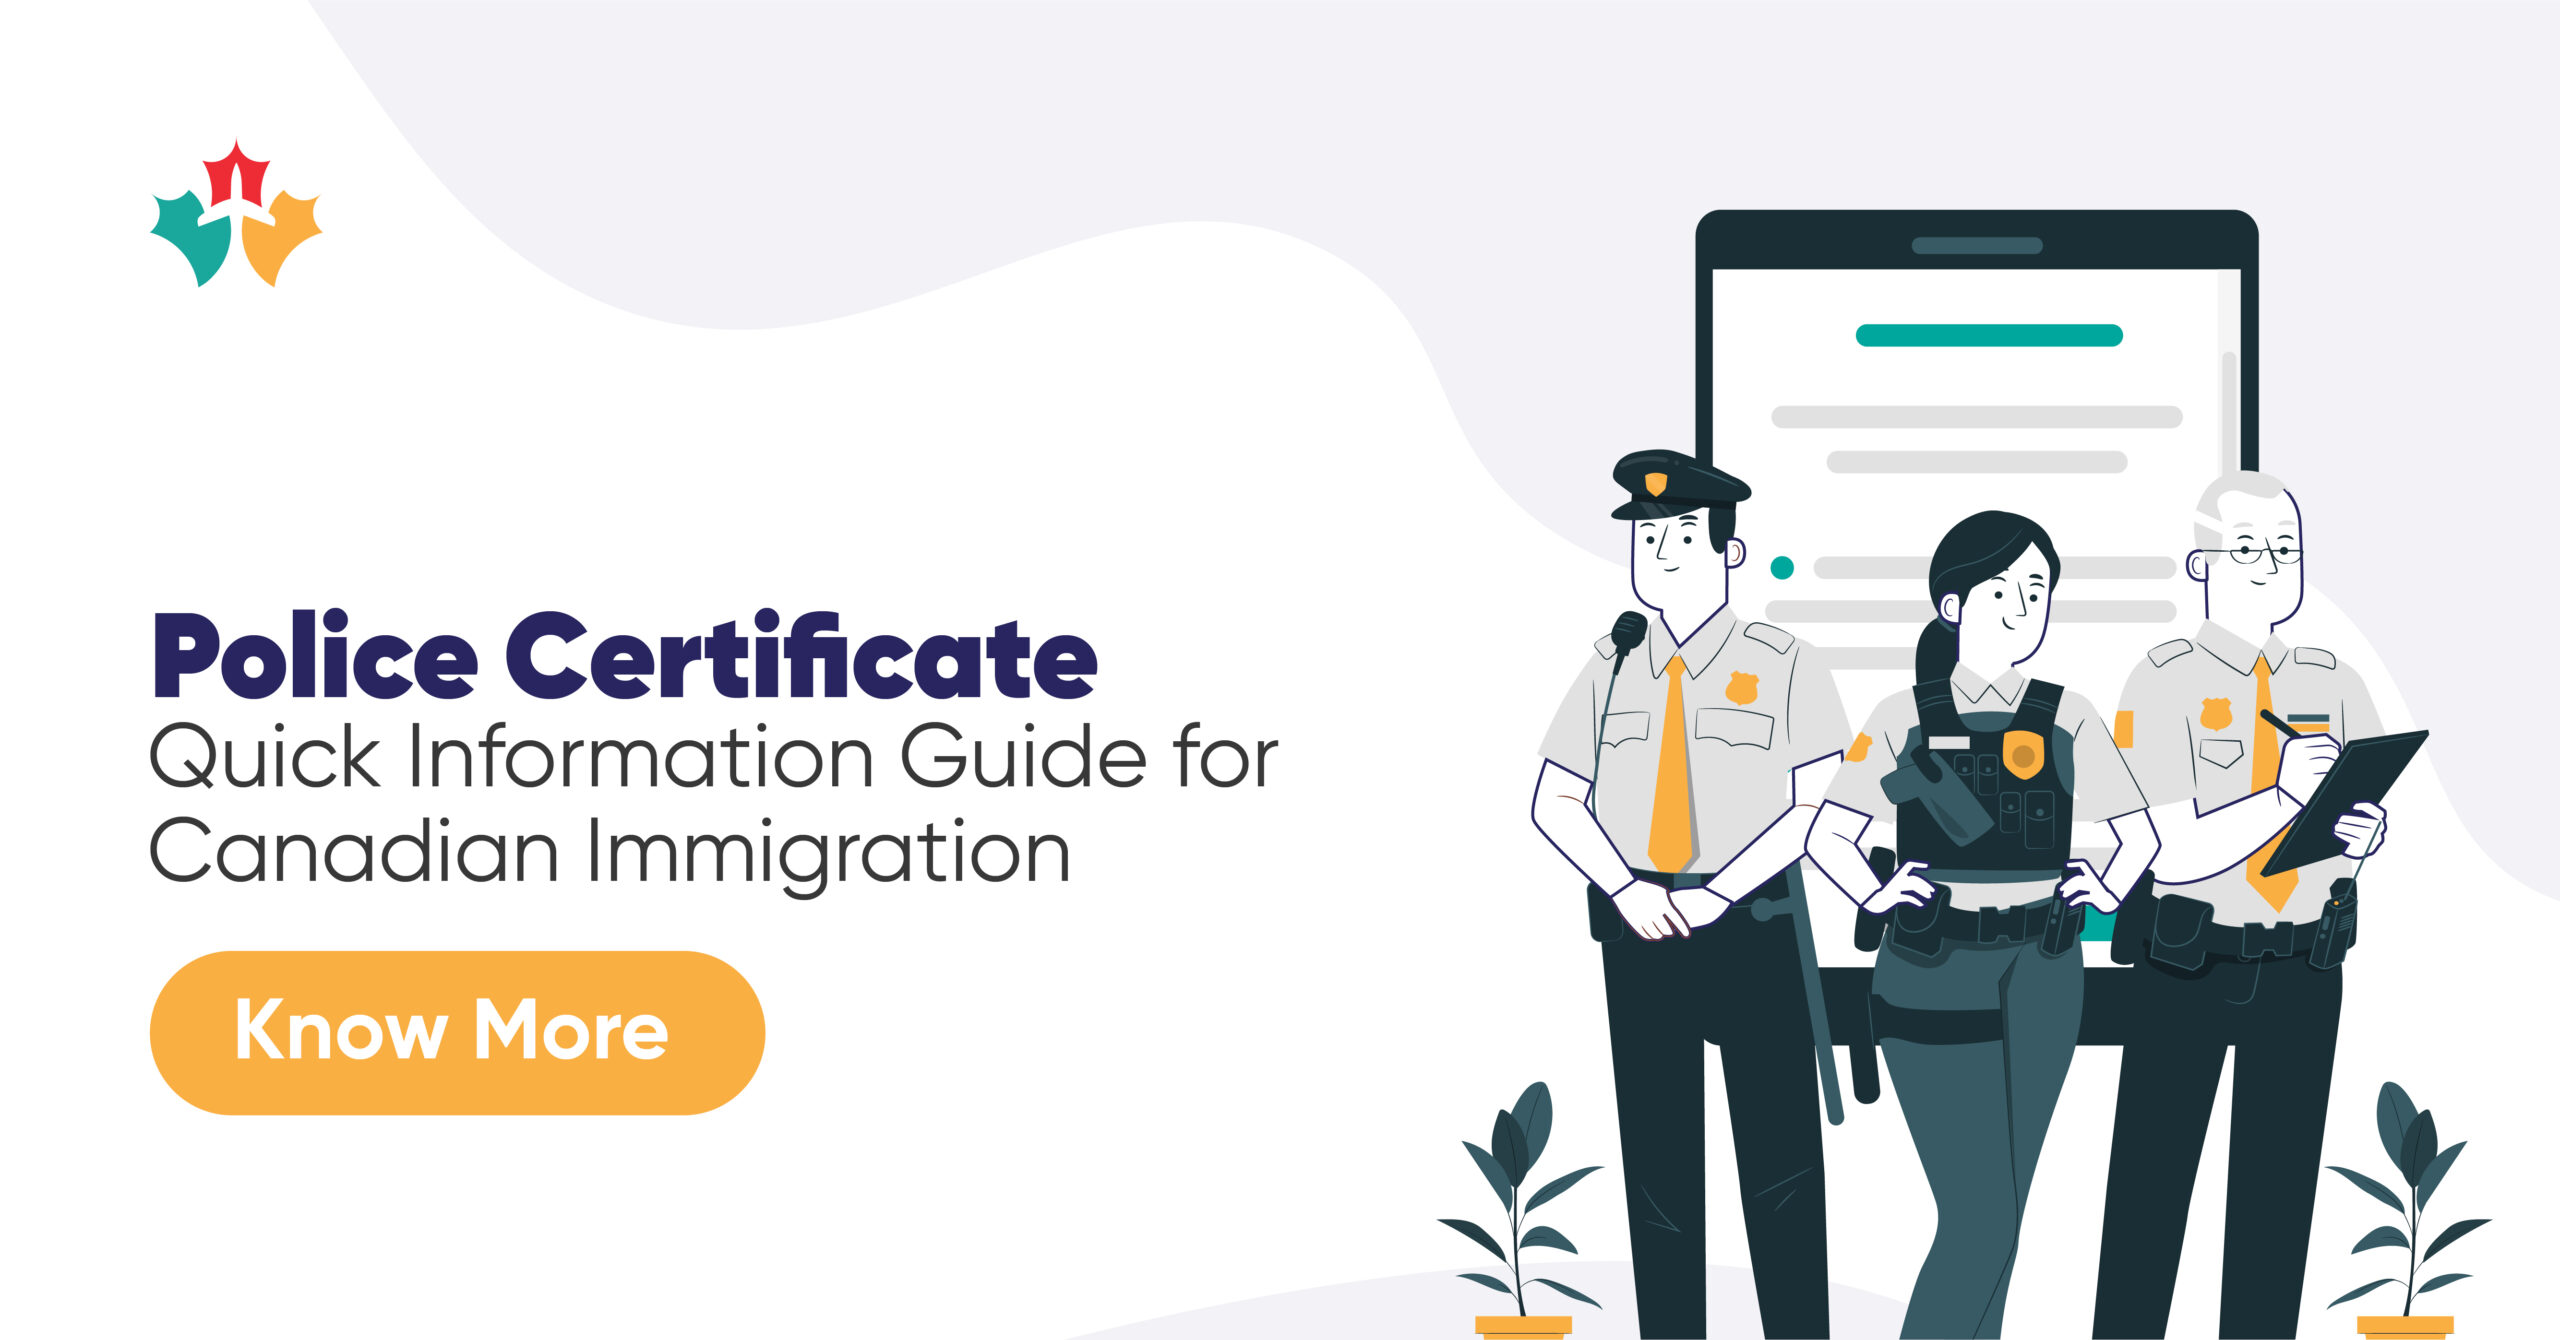 Police Certificate: Quick Information Guide for Canadian Immigration